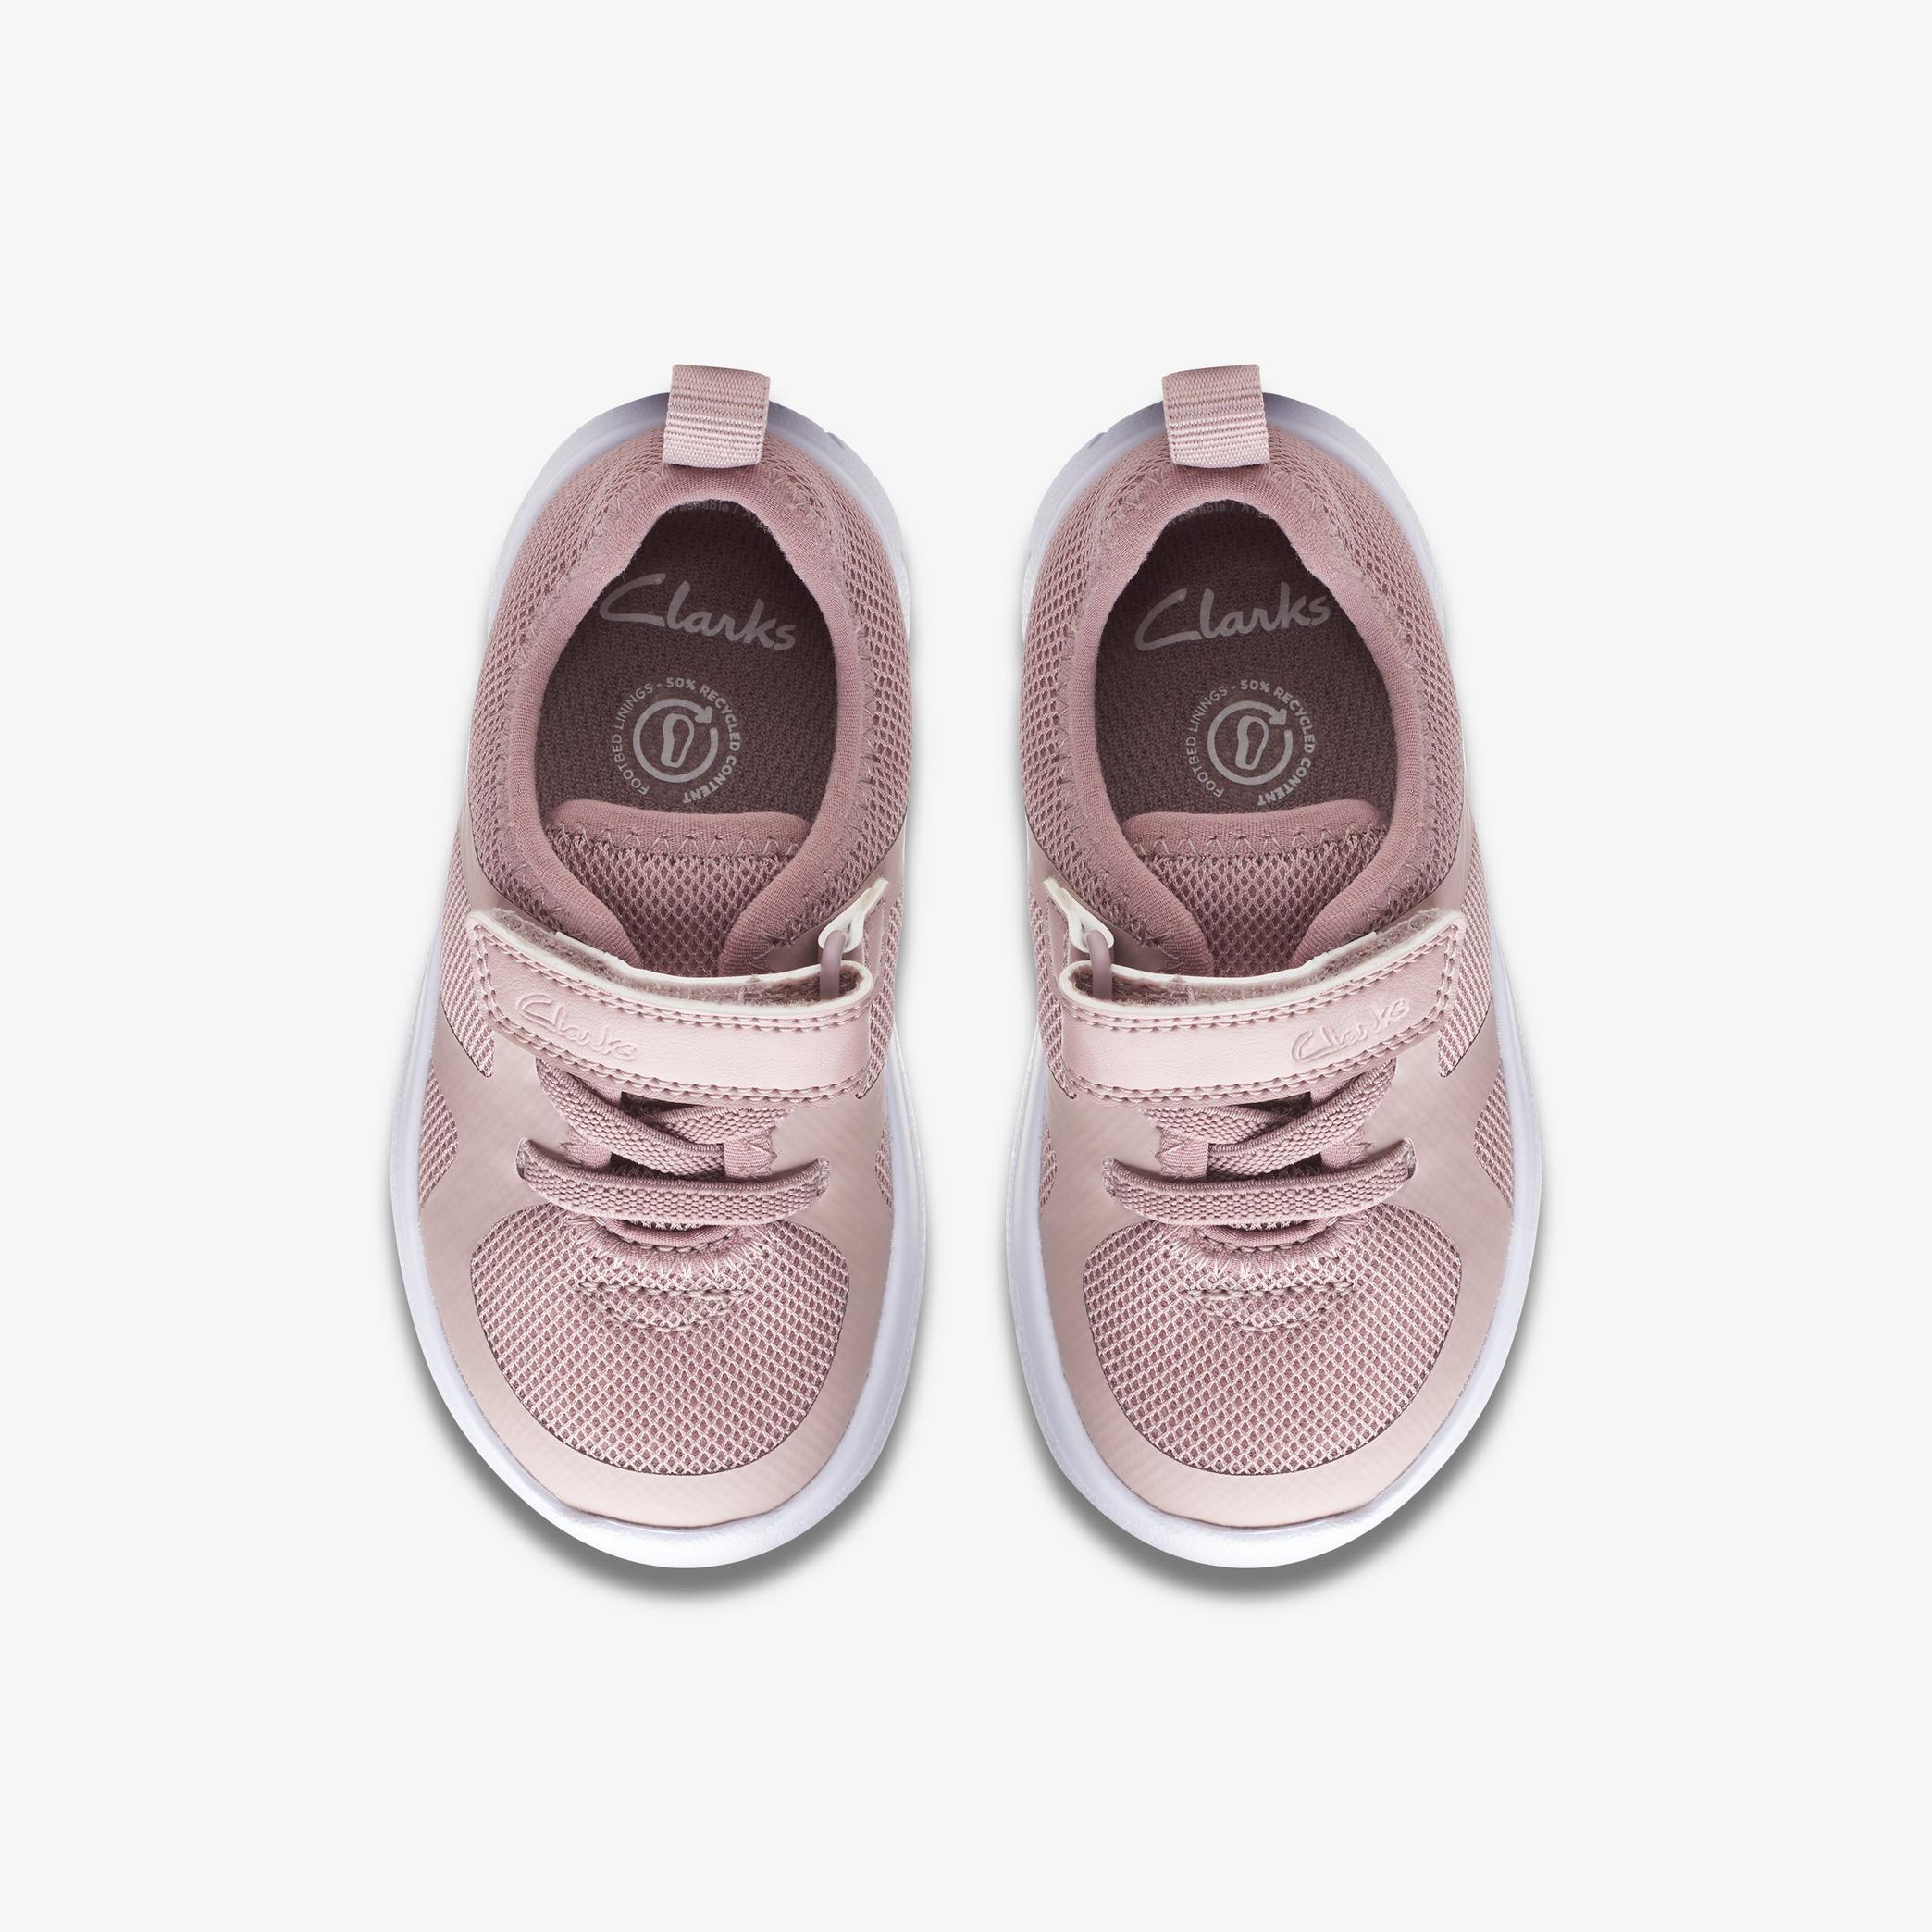 Girls Ath Flux Toddler Pink Trainers | Clarks UK